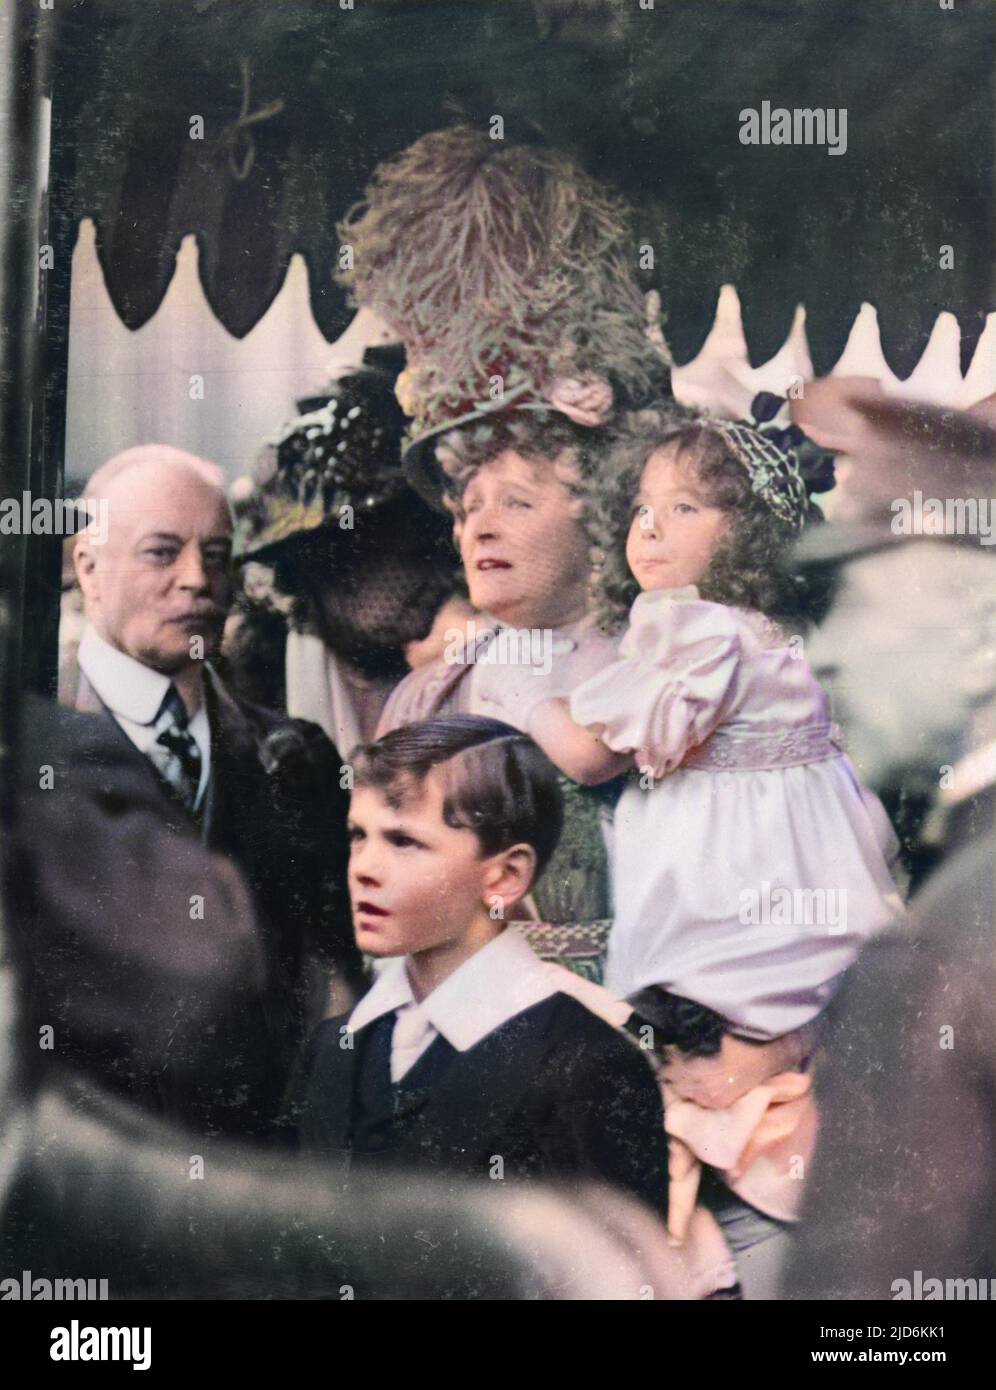 The Countess of Warwick, Frances Evelyn Maynard, Lady Brooke, leaving St Margaret's Church, Westminster, after the marriage of her son Lord Brooke (Leopold Guy Francis Maynard Greville) to Elfrida Marjorie Eden.  The Countess of Warwick was a mistress of King Edward VII. Colourised version of: 10410511       Date: 29-Apr-09 Stock Photo